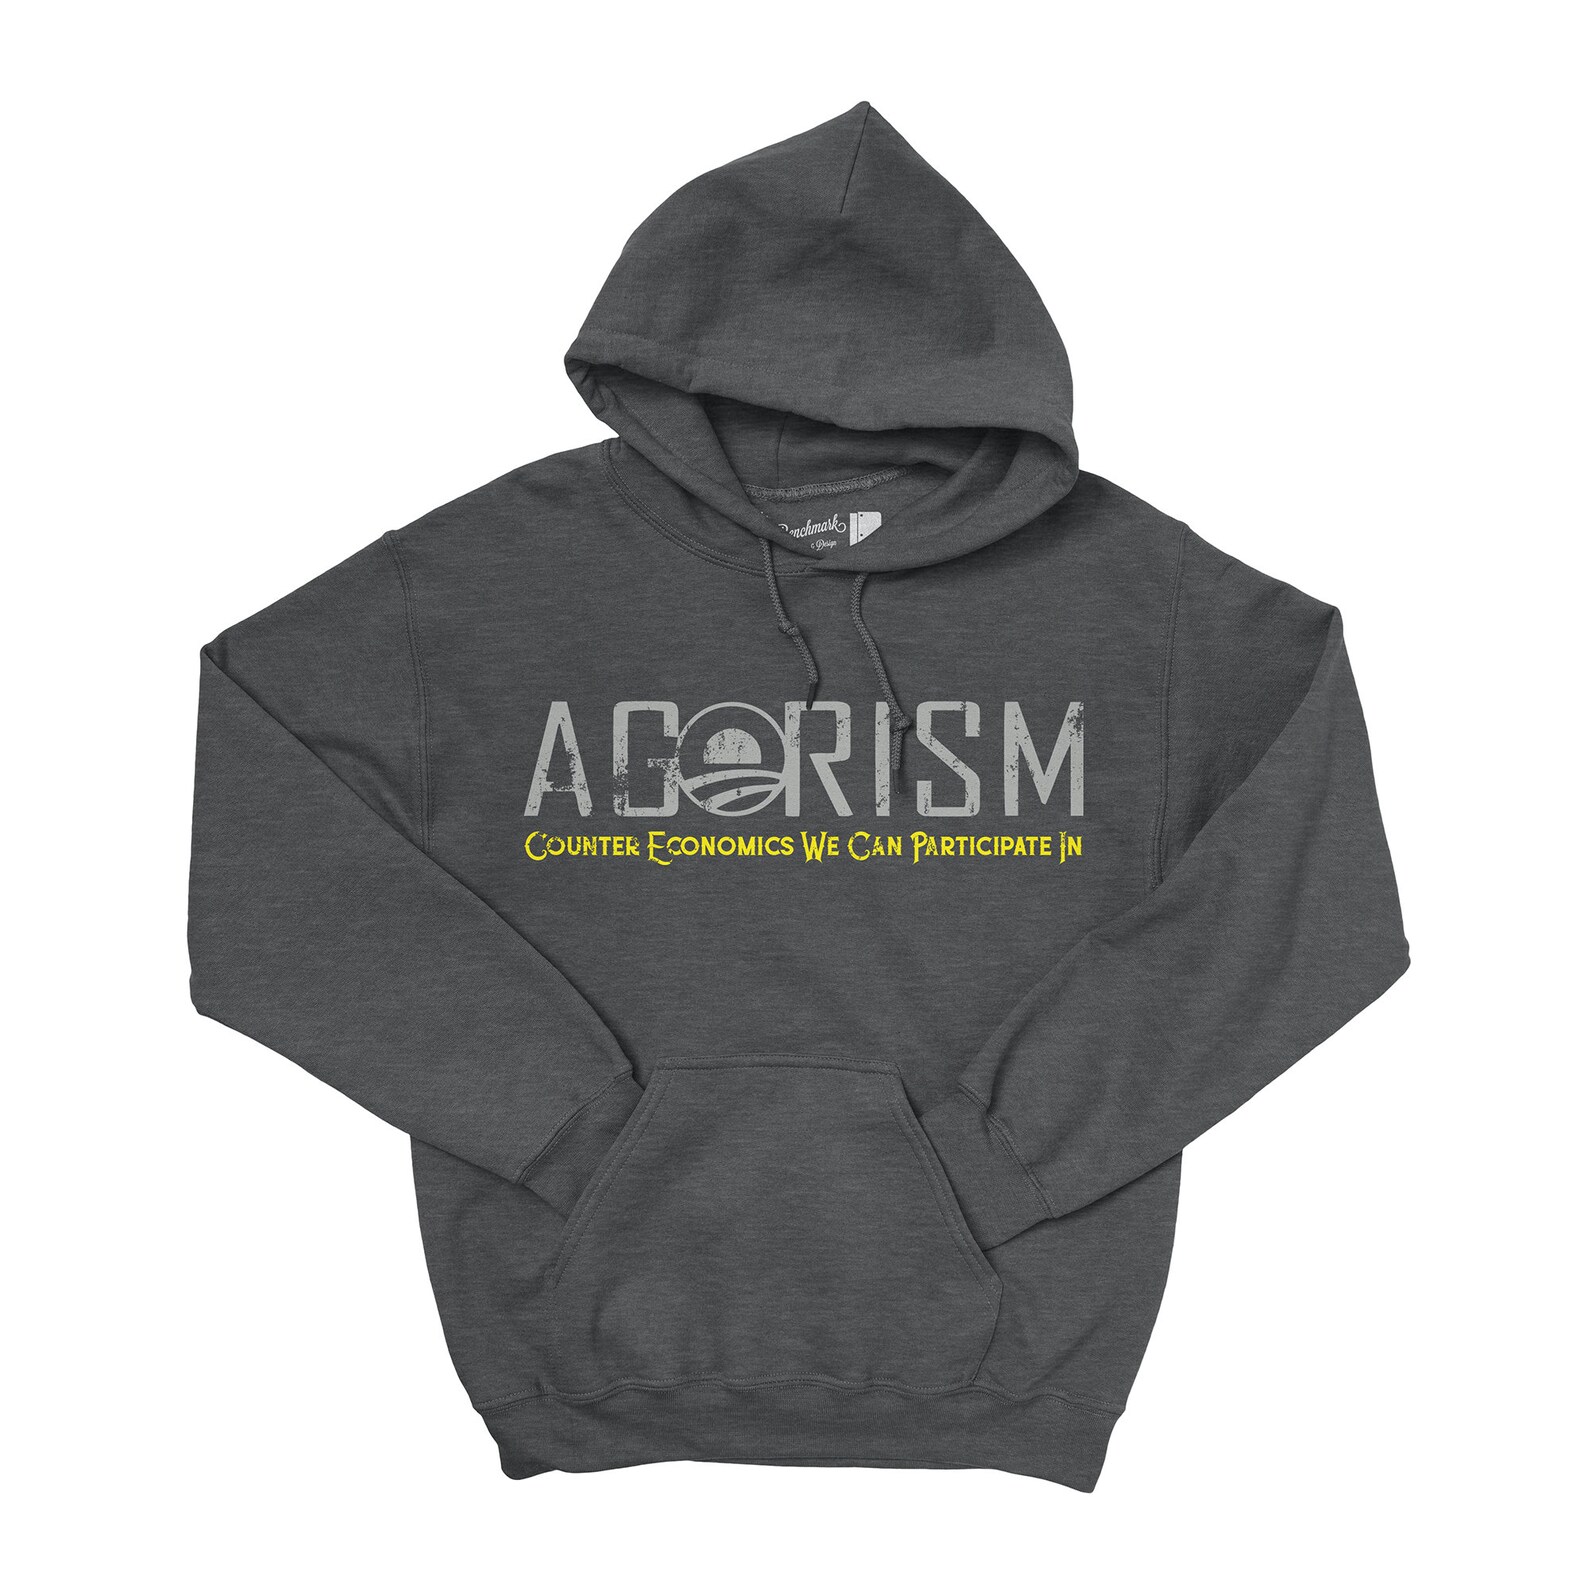 Agorism Counter Economy Graphic Tri-blend T-shirt or Hoodie - Etsy